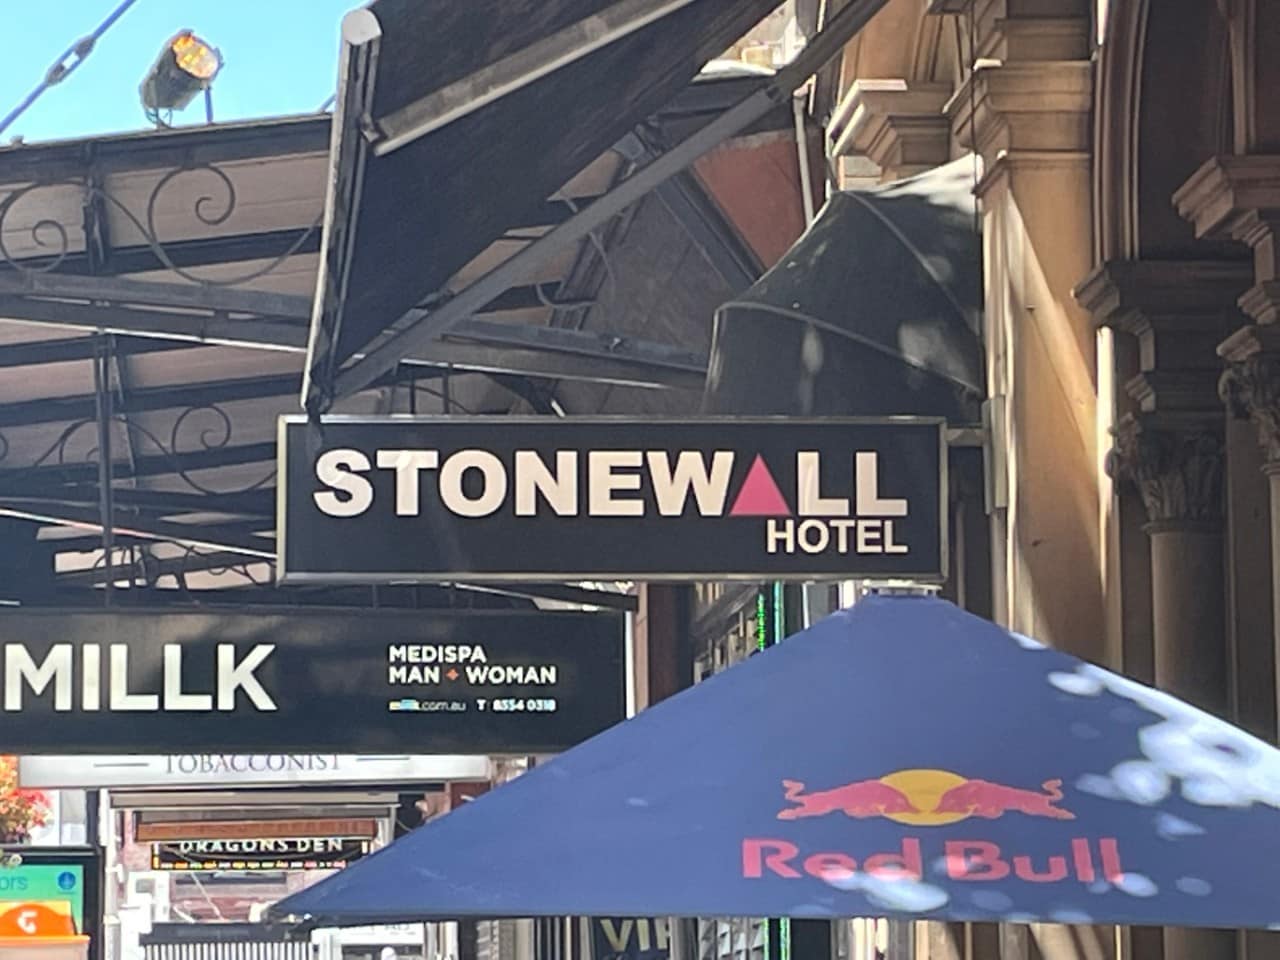 photo of a street sign that says Stonewall Hotel with a pink triangle for the a